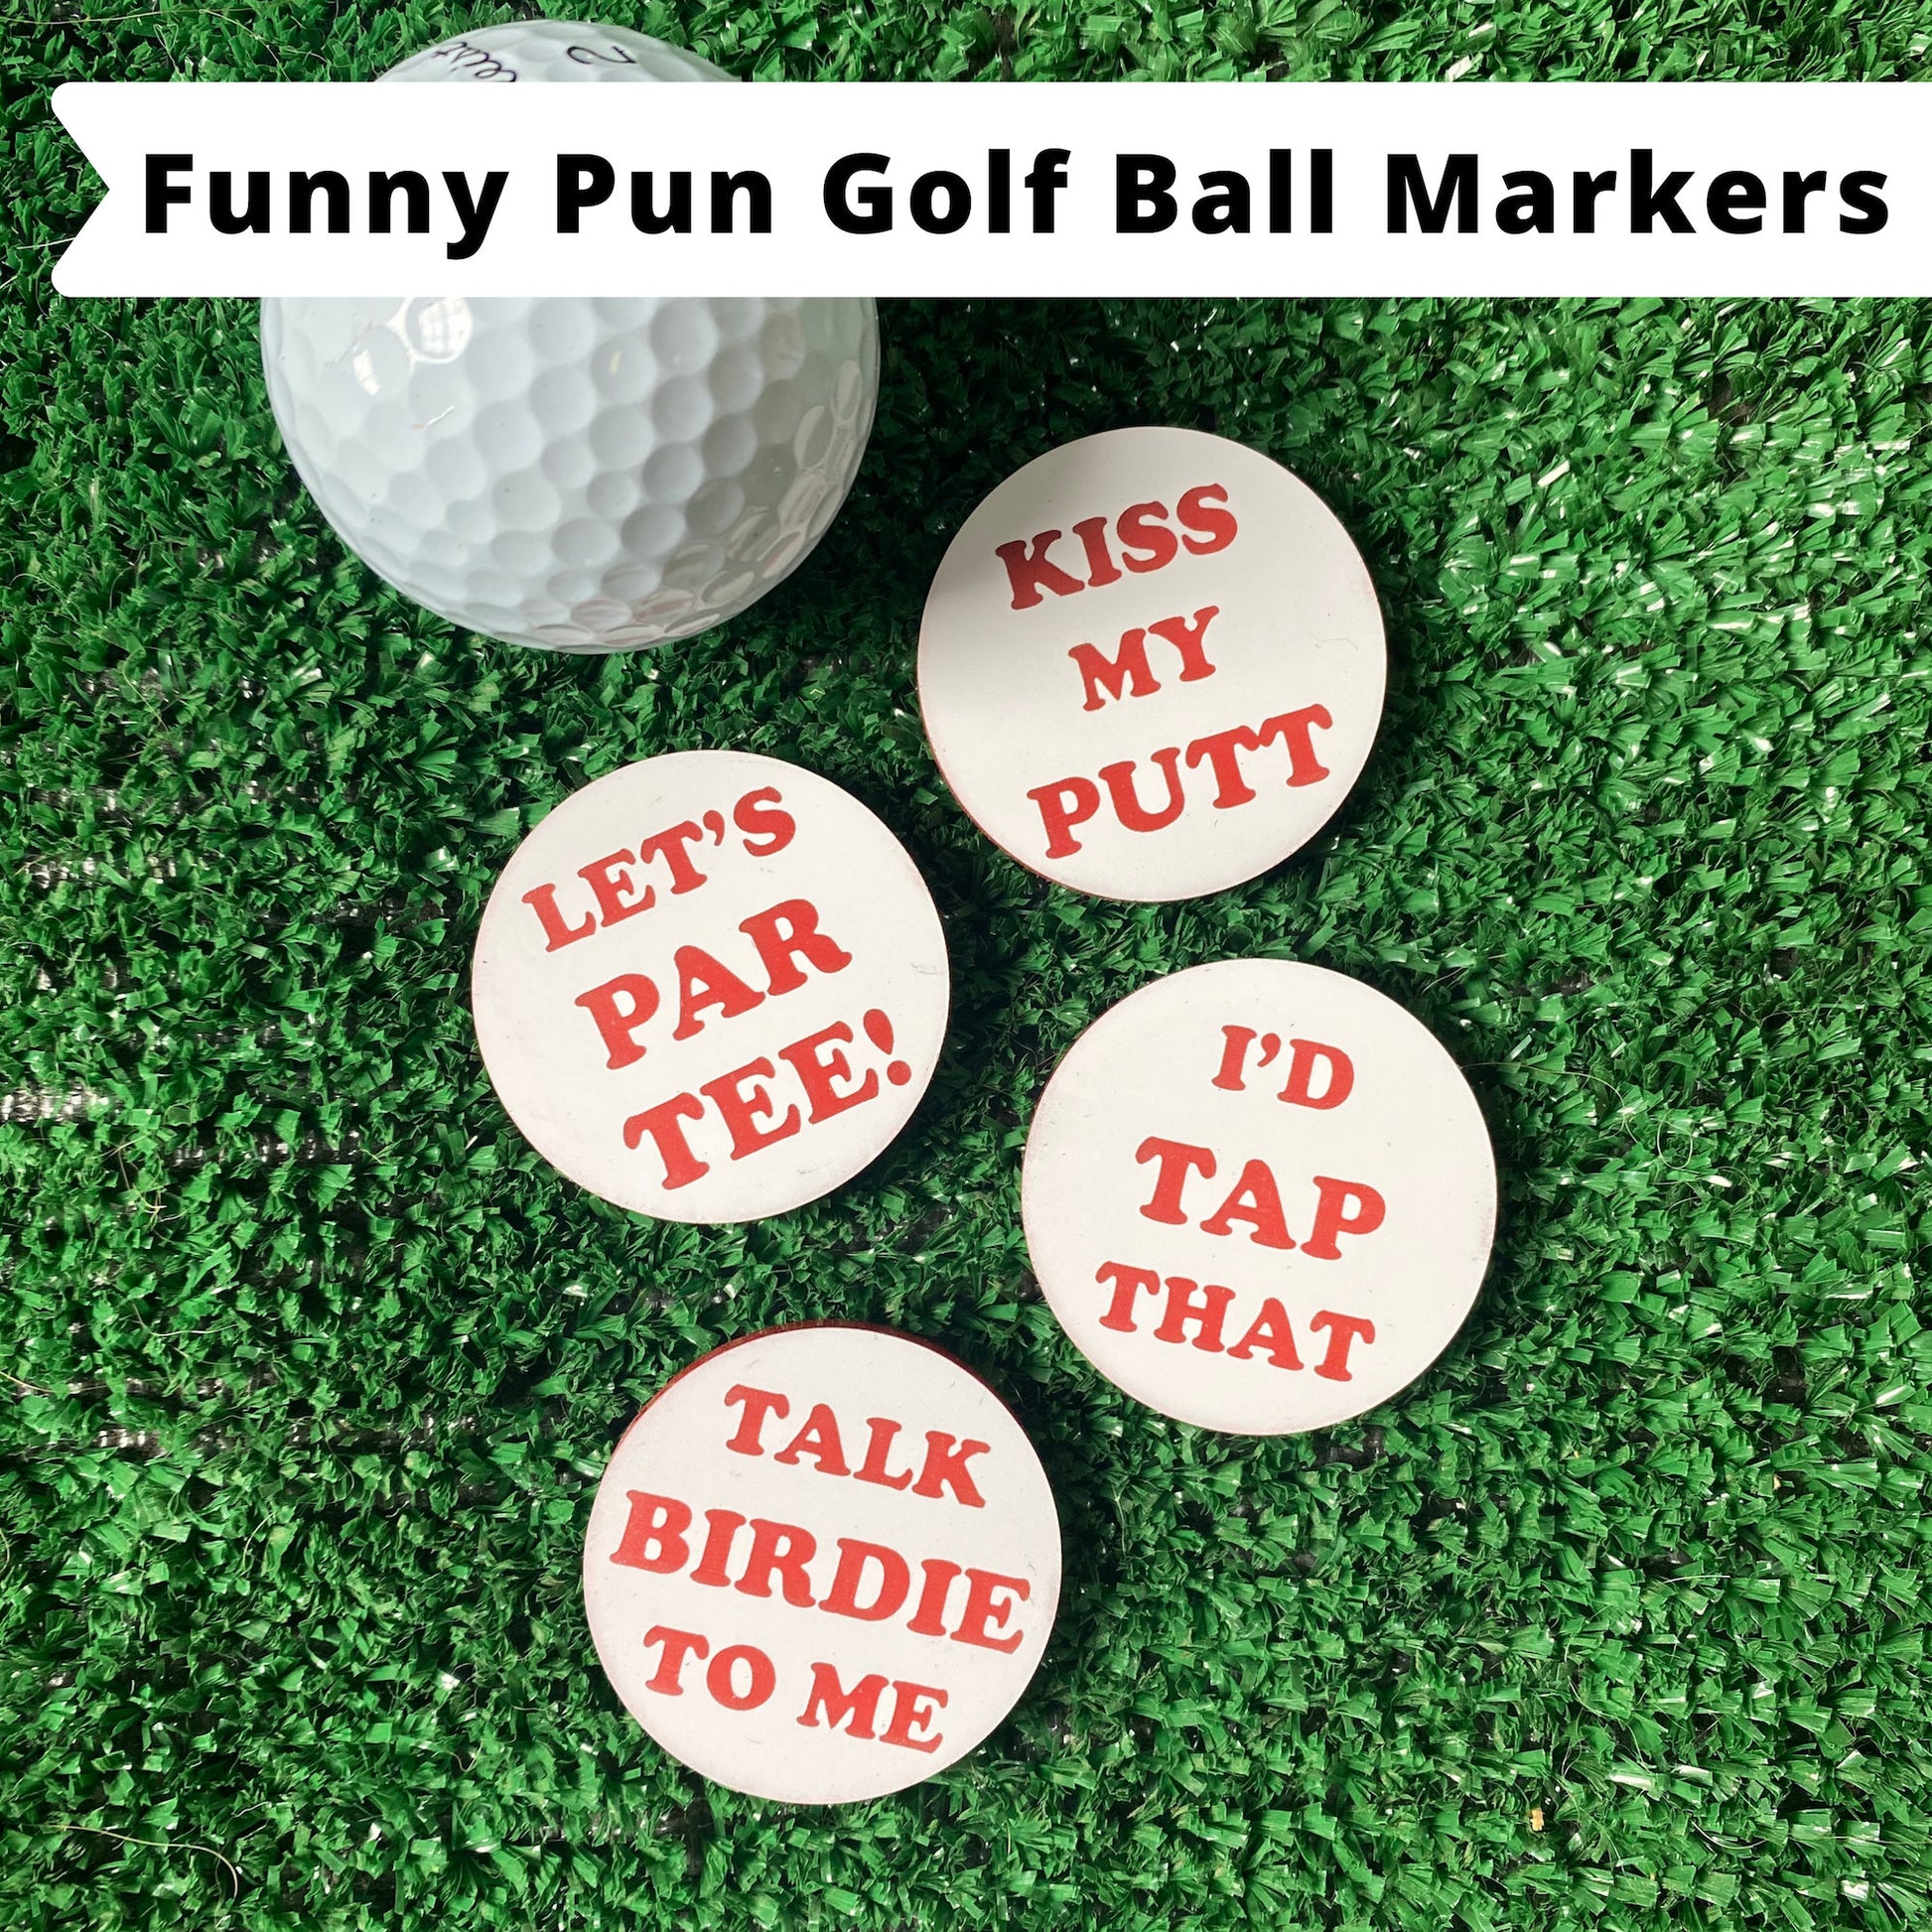 Golf Ball Markers Funny Pun Set of 4 | Gift for Golfer | Funny Golfing | Poker Chip Size